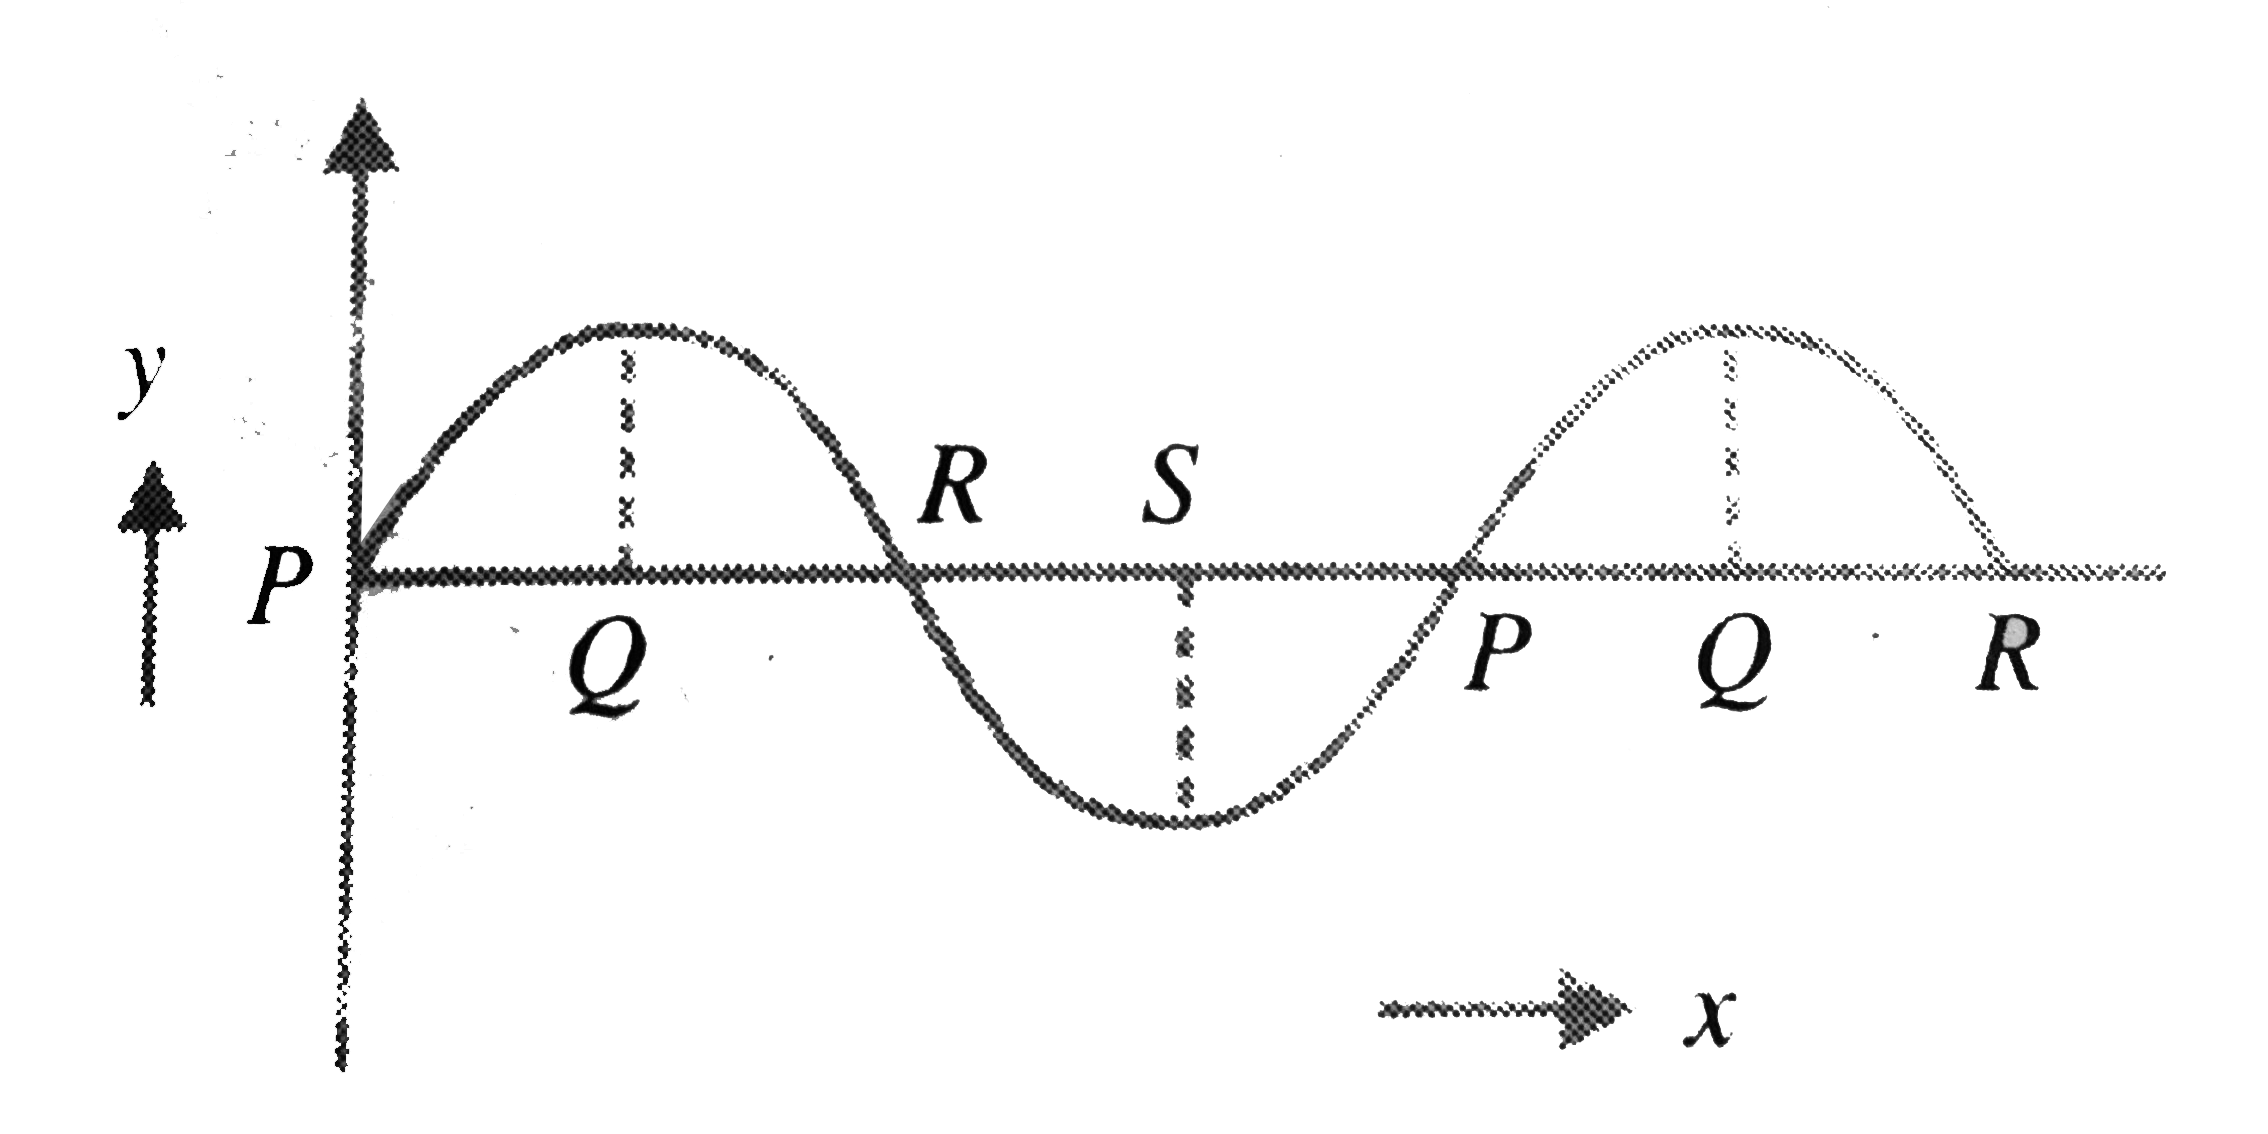 Figure. Represents the displacement y versus distance x along the direction of propagation of a longitudinal wave. The pressure is maximum at position marked